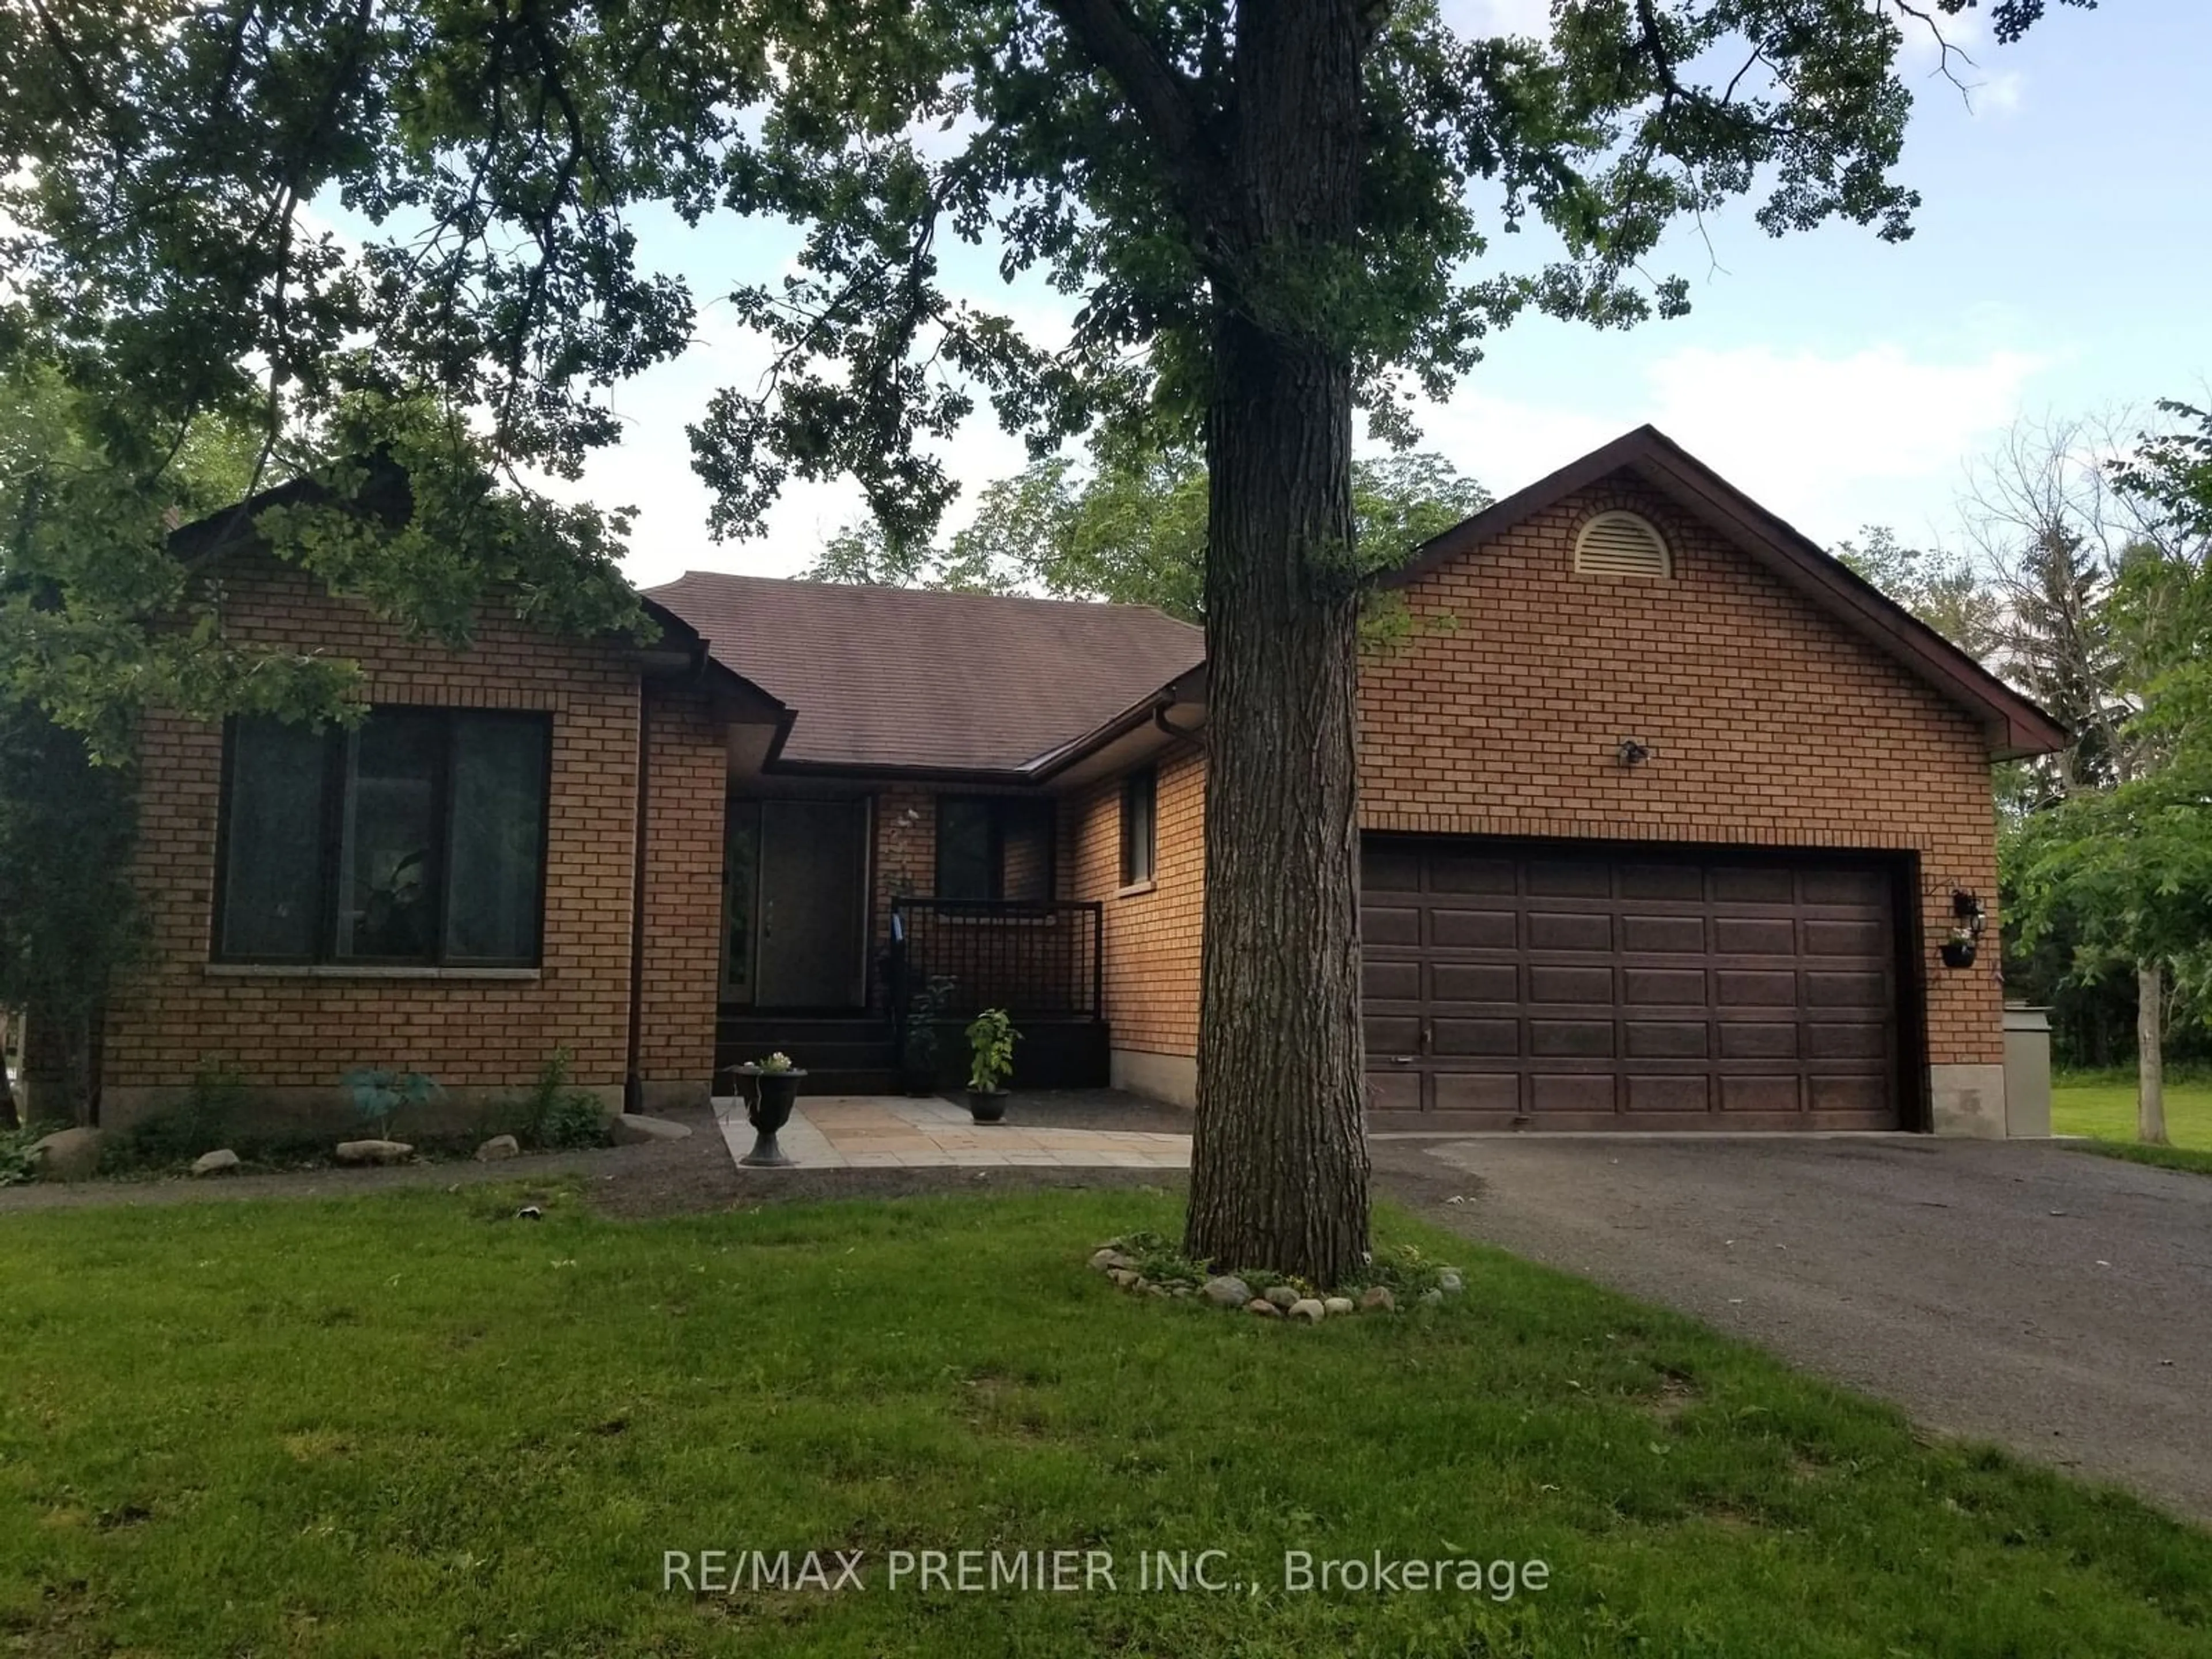 Home with brick exterior material for 3109 12th Line, Trent Hills Ontario K0K 2M0